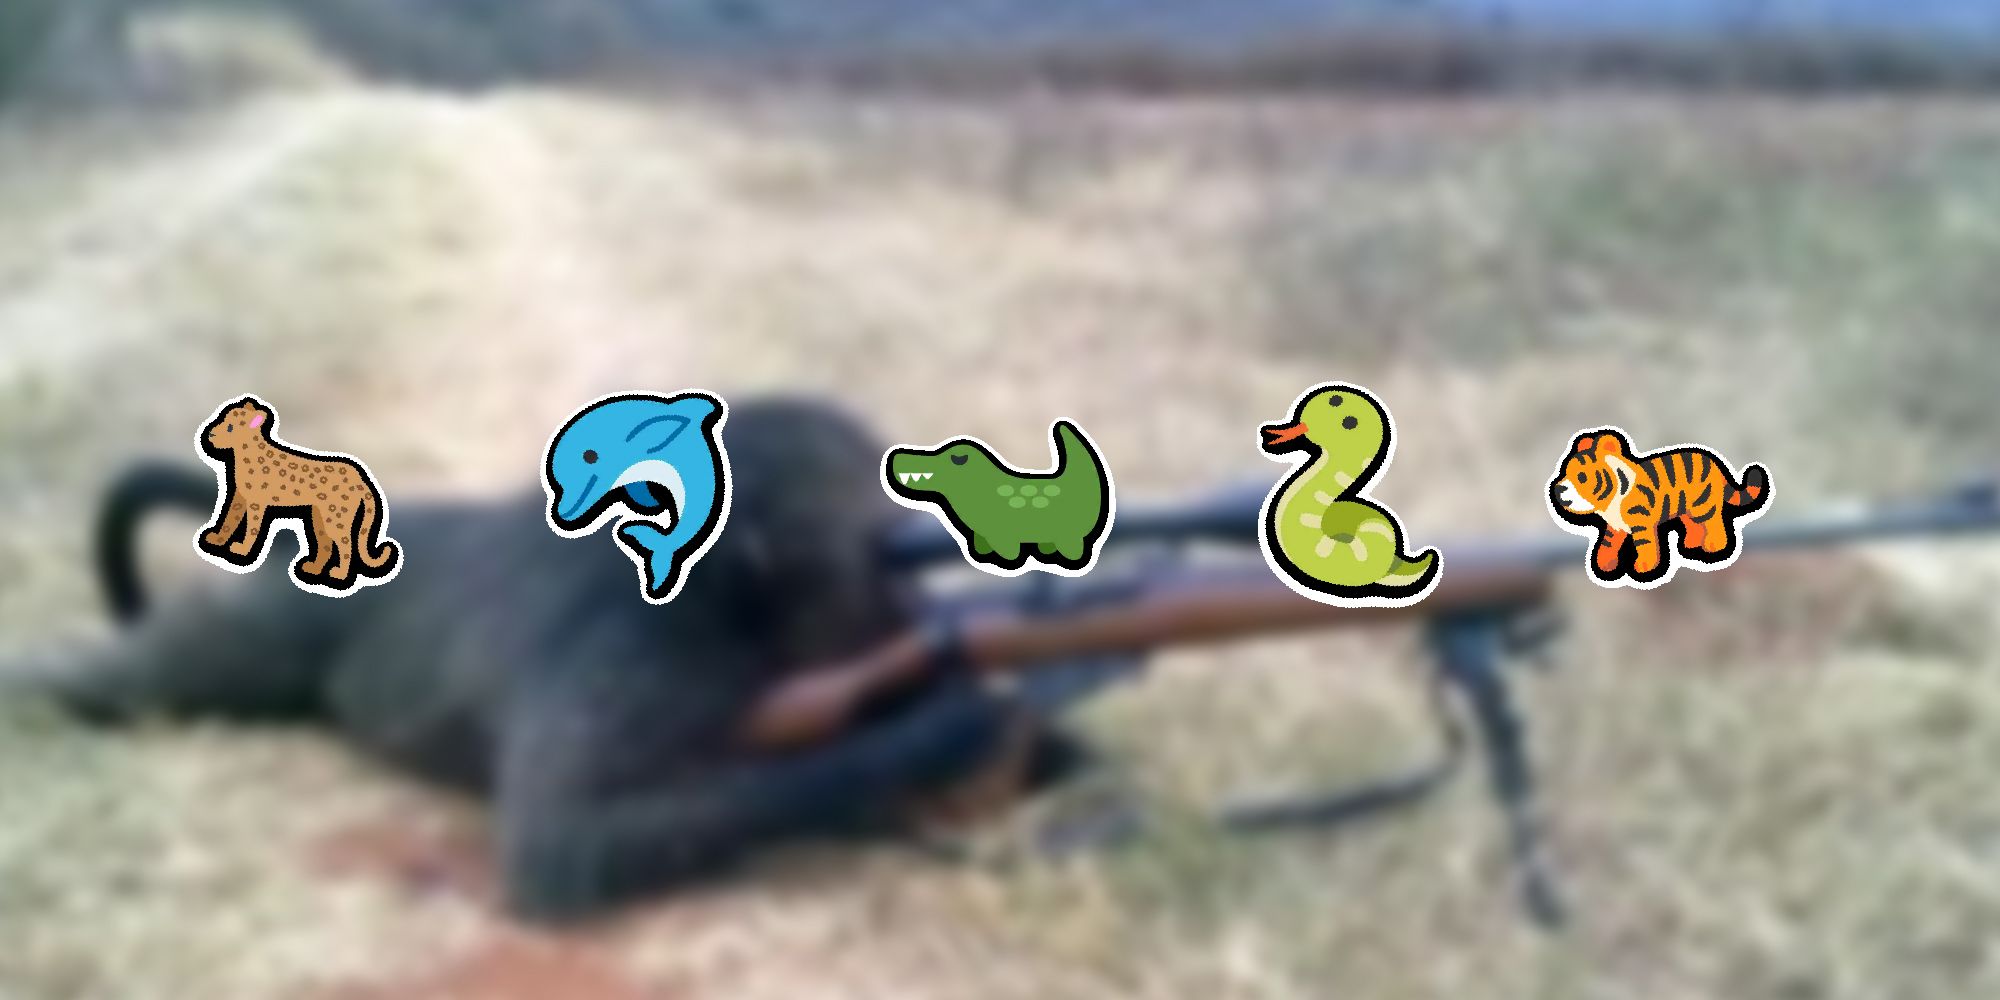 Super Auto Pets - PNG Of All The Sniping Pets Overlaid On Image Of A Monkey With A Sniper